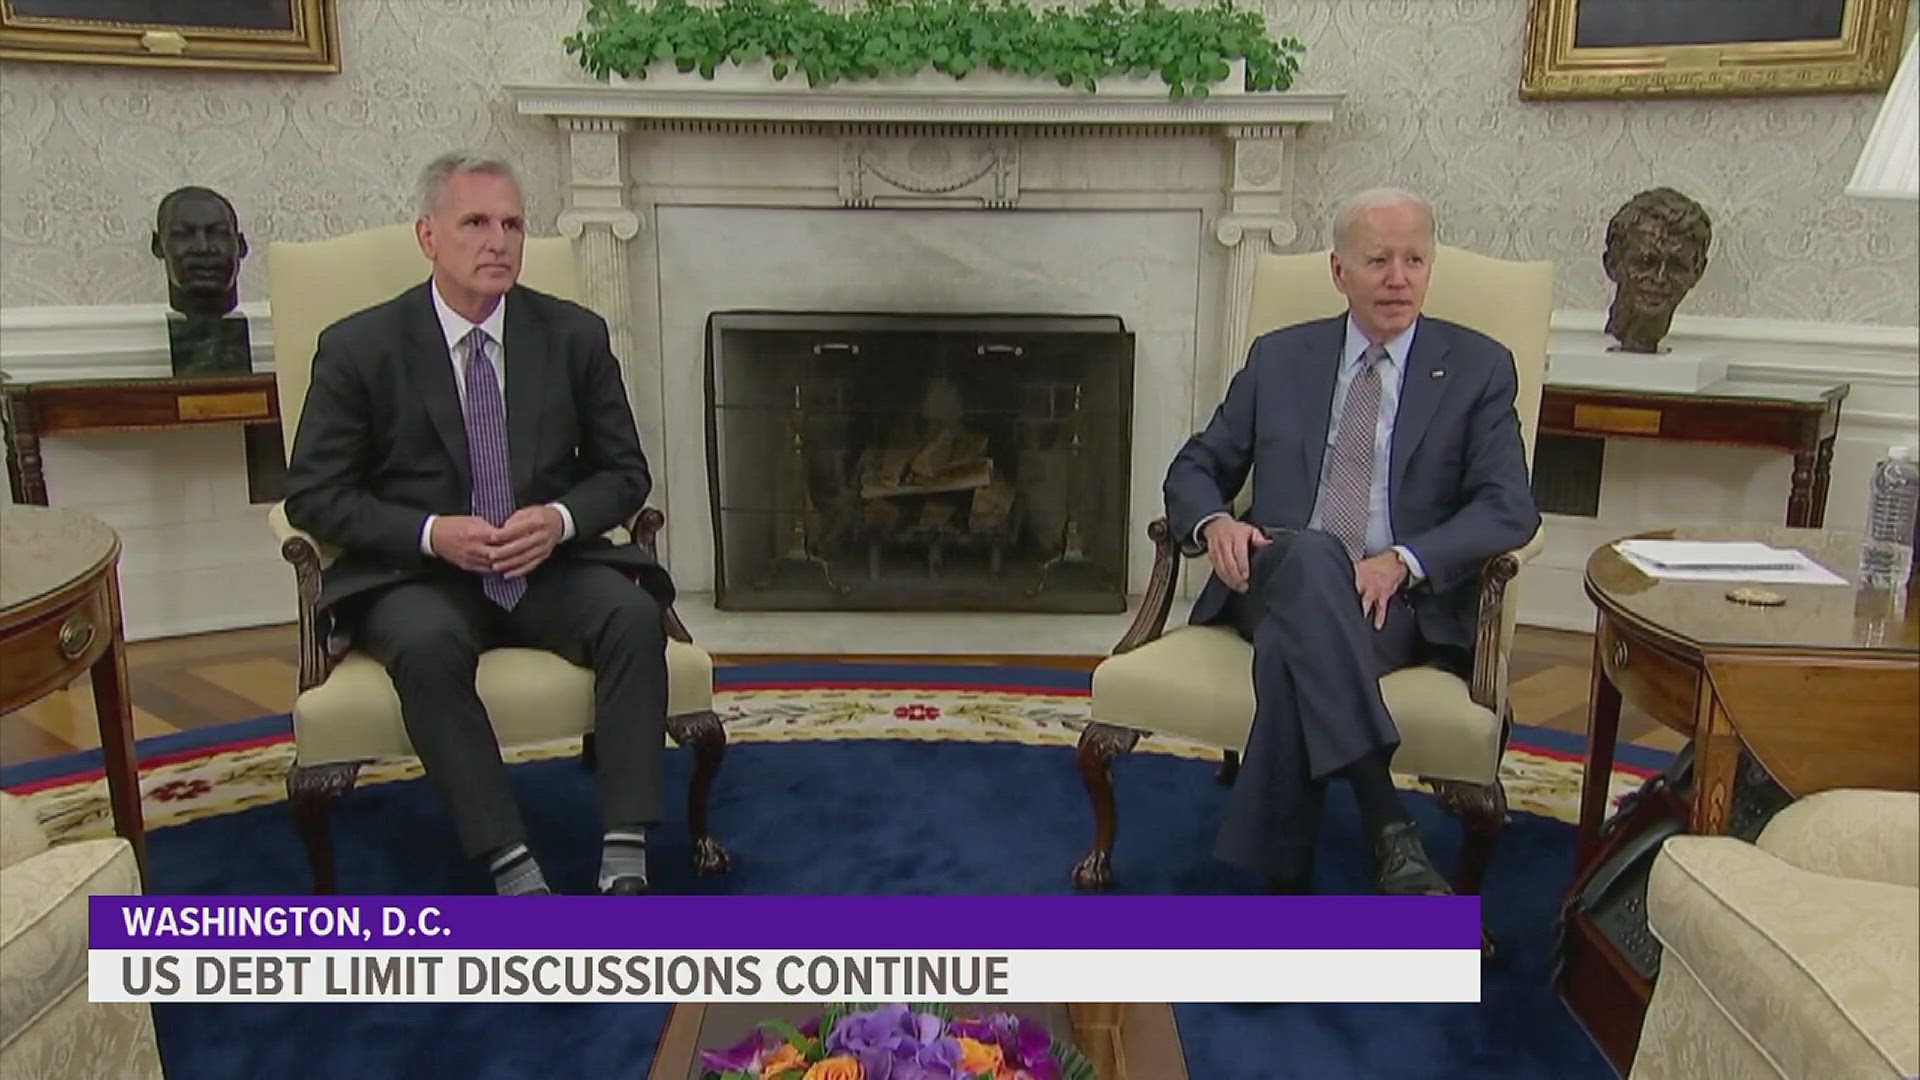 Both House Speaker McCarthy and President Biden are optimistic about a deal getting done. Discussions have been productive.